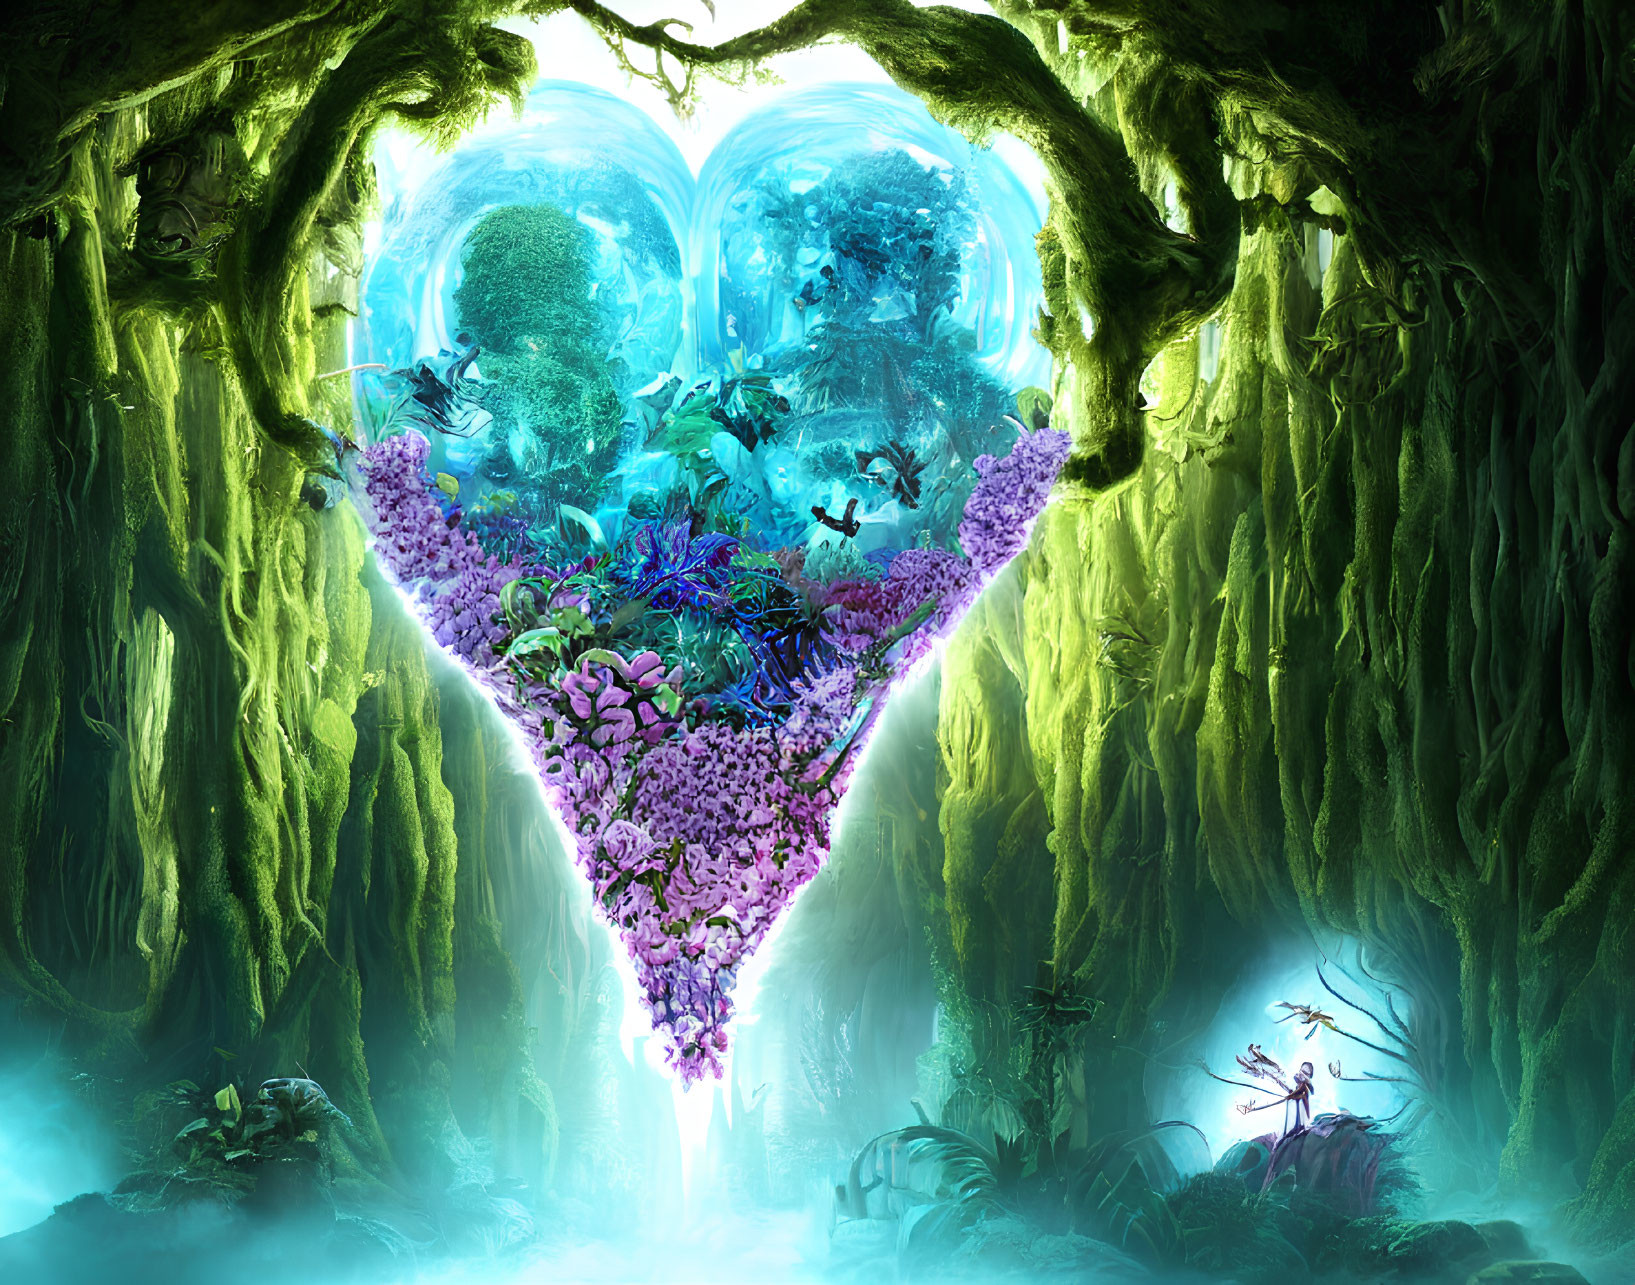 Colorful heart-shaped portal in lush forest with waterfalls and butterflies